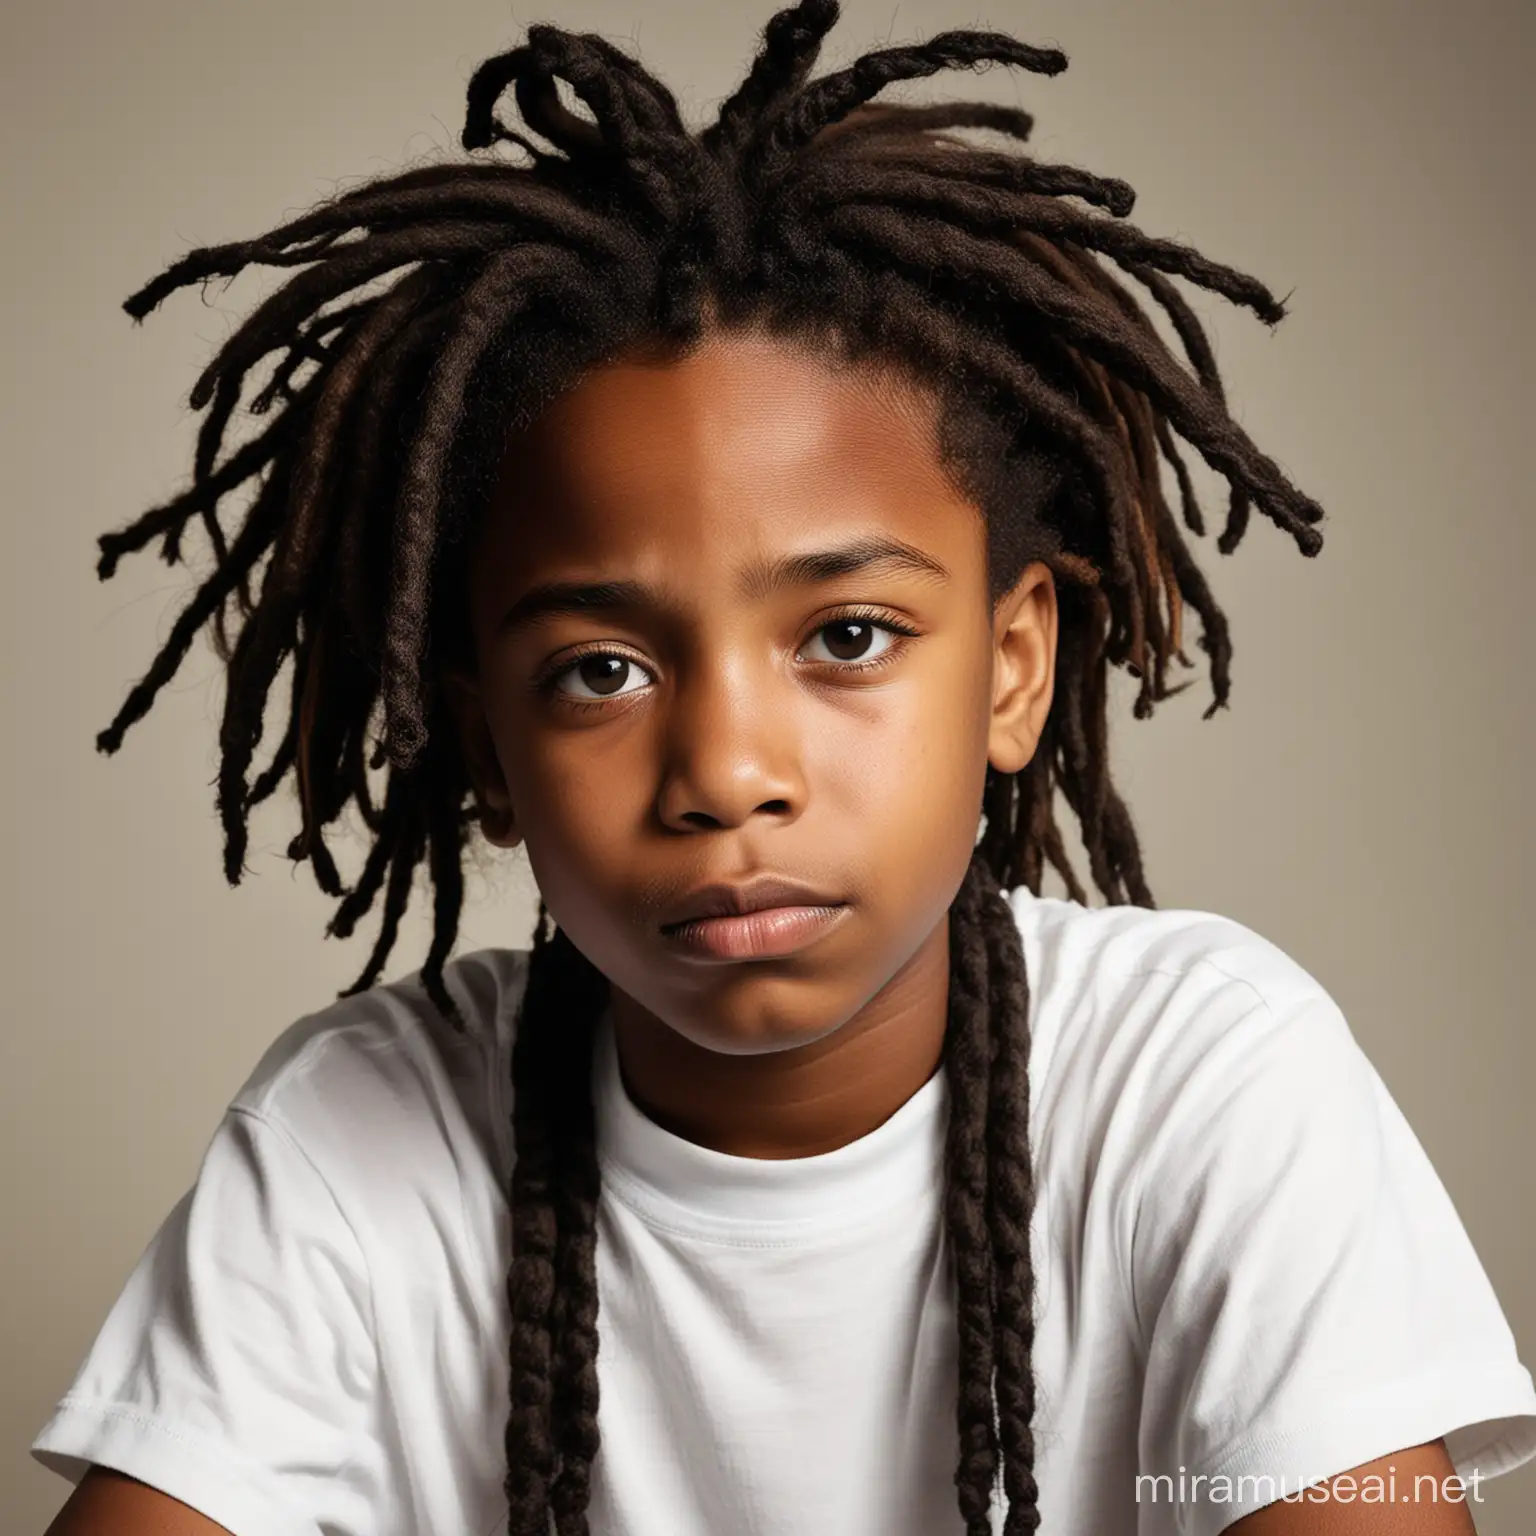 Young Black Kid with Dreadlocks in a Somber Room